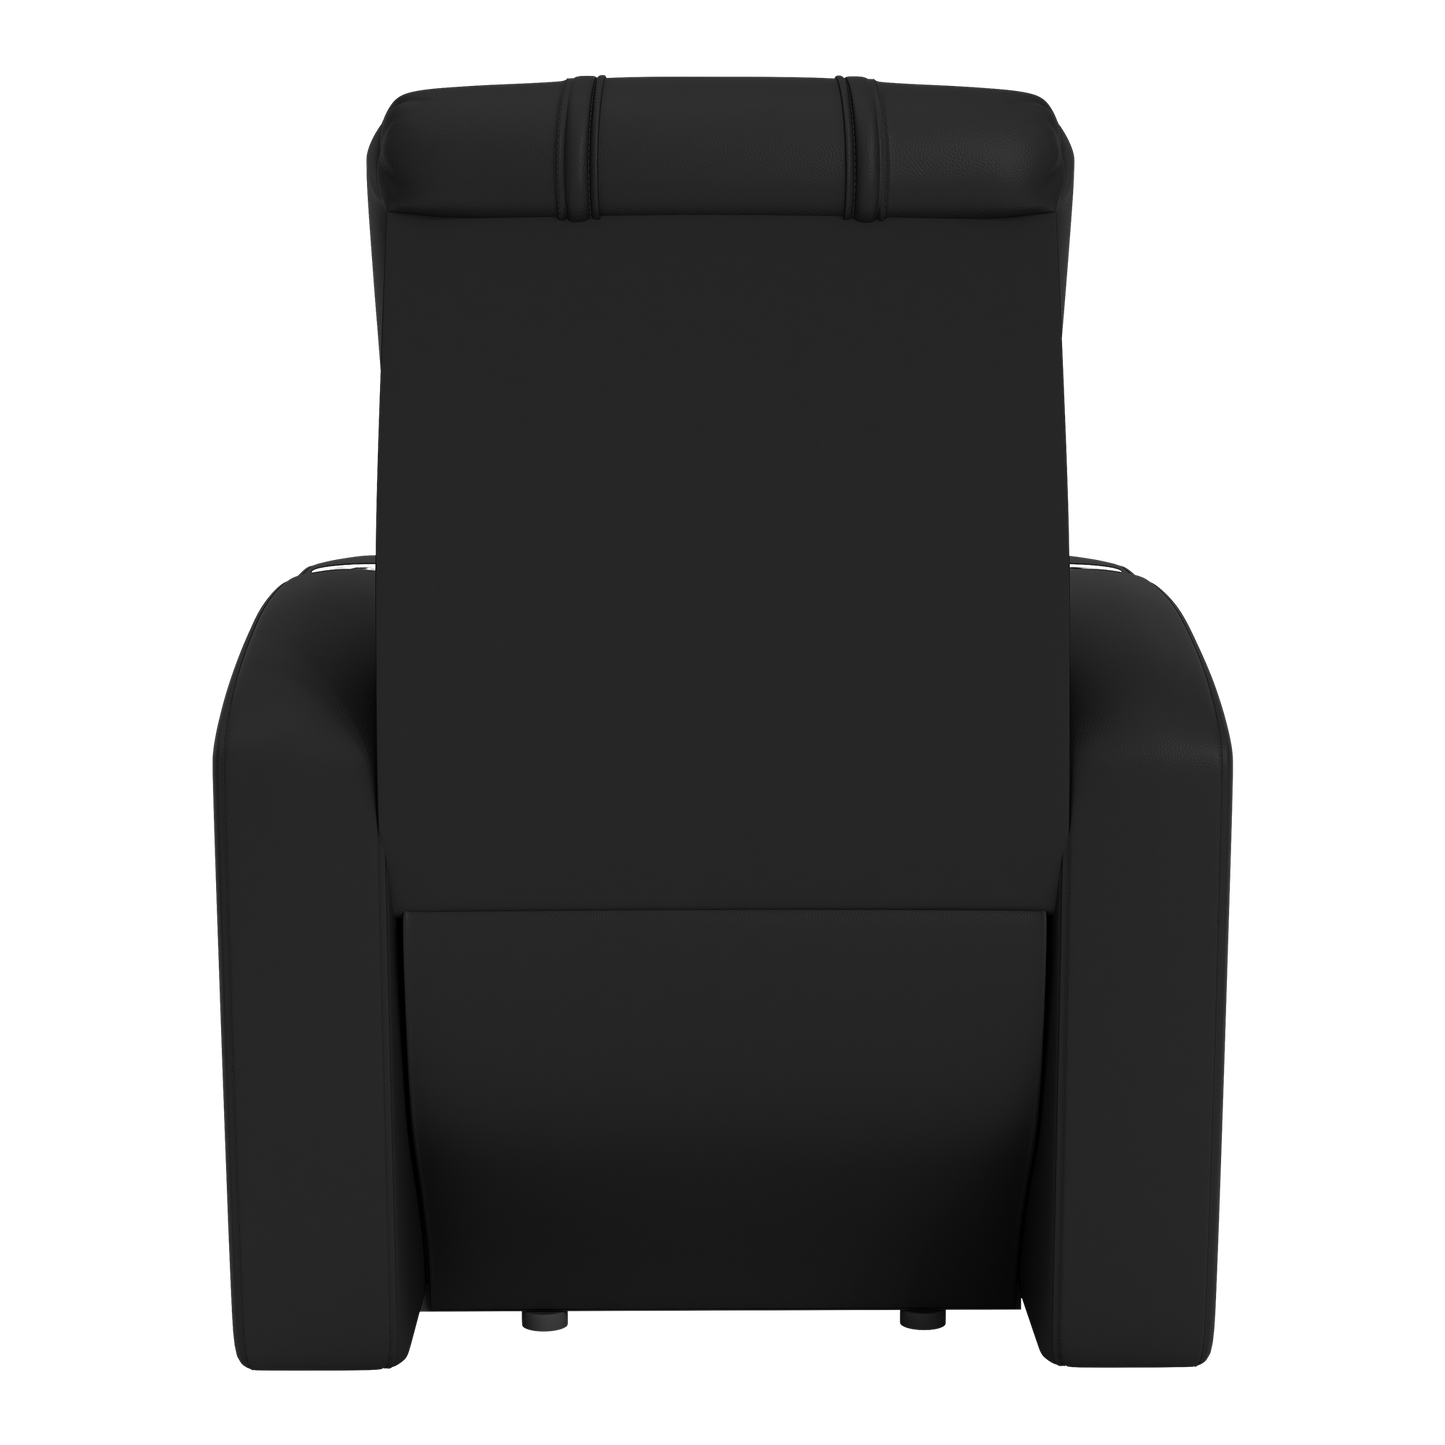 Stealth Recliner with UNC Wilmington Secondary Logo